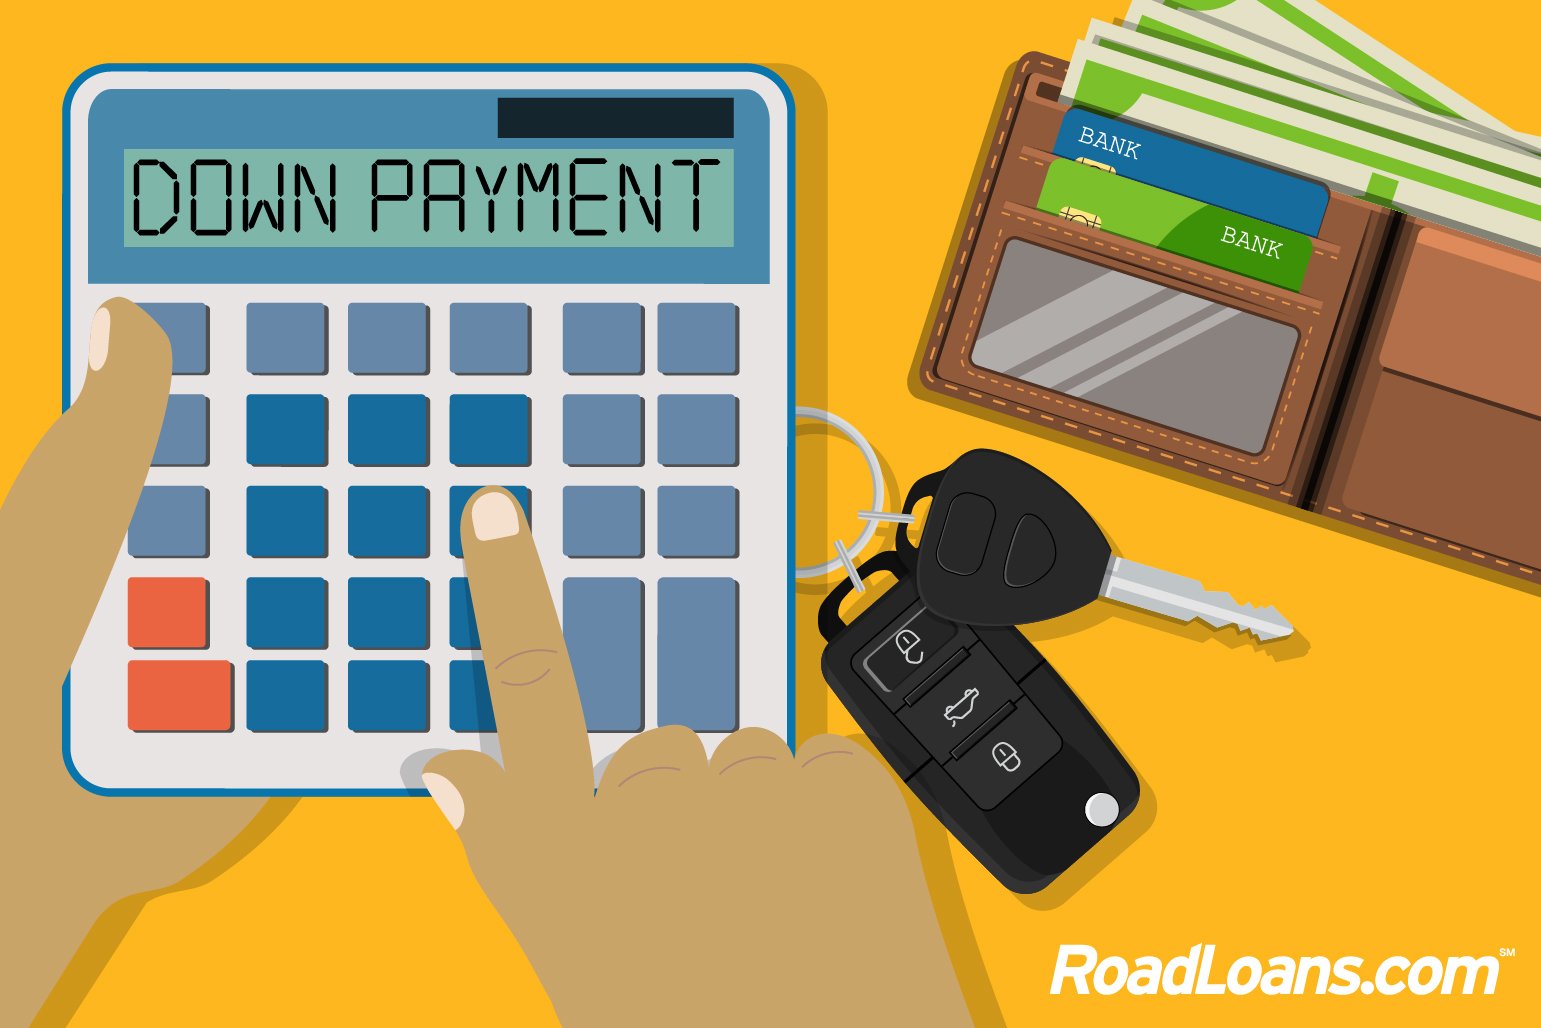 How Much Should a Down Payment on a Car Be?